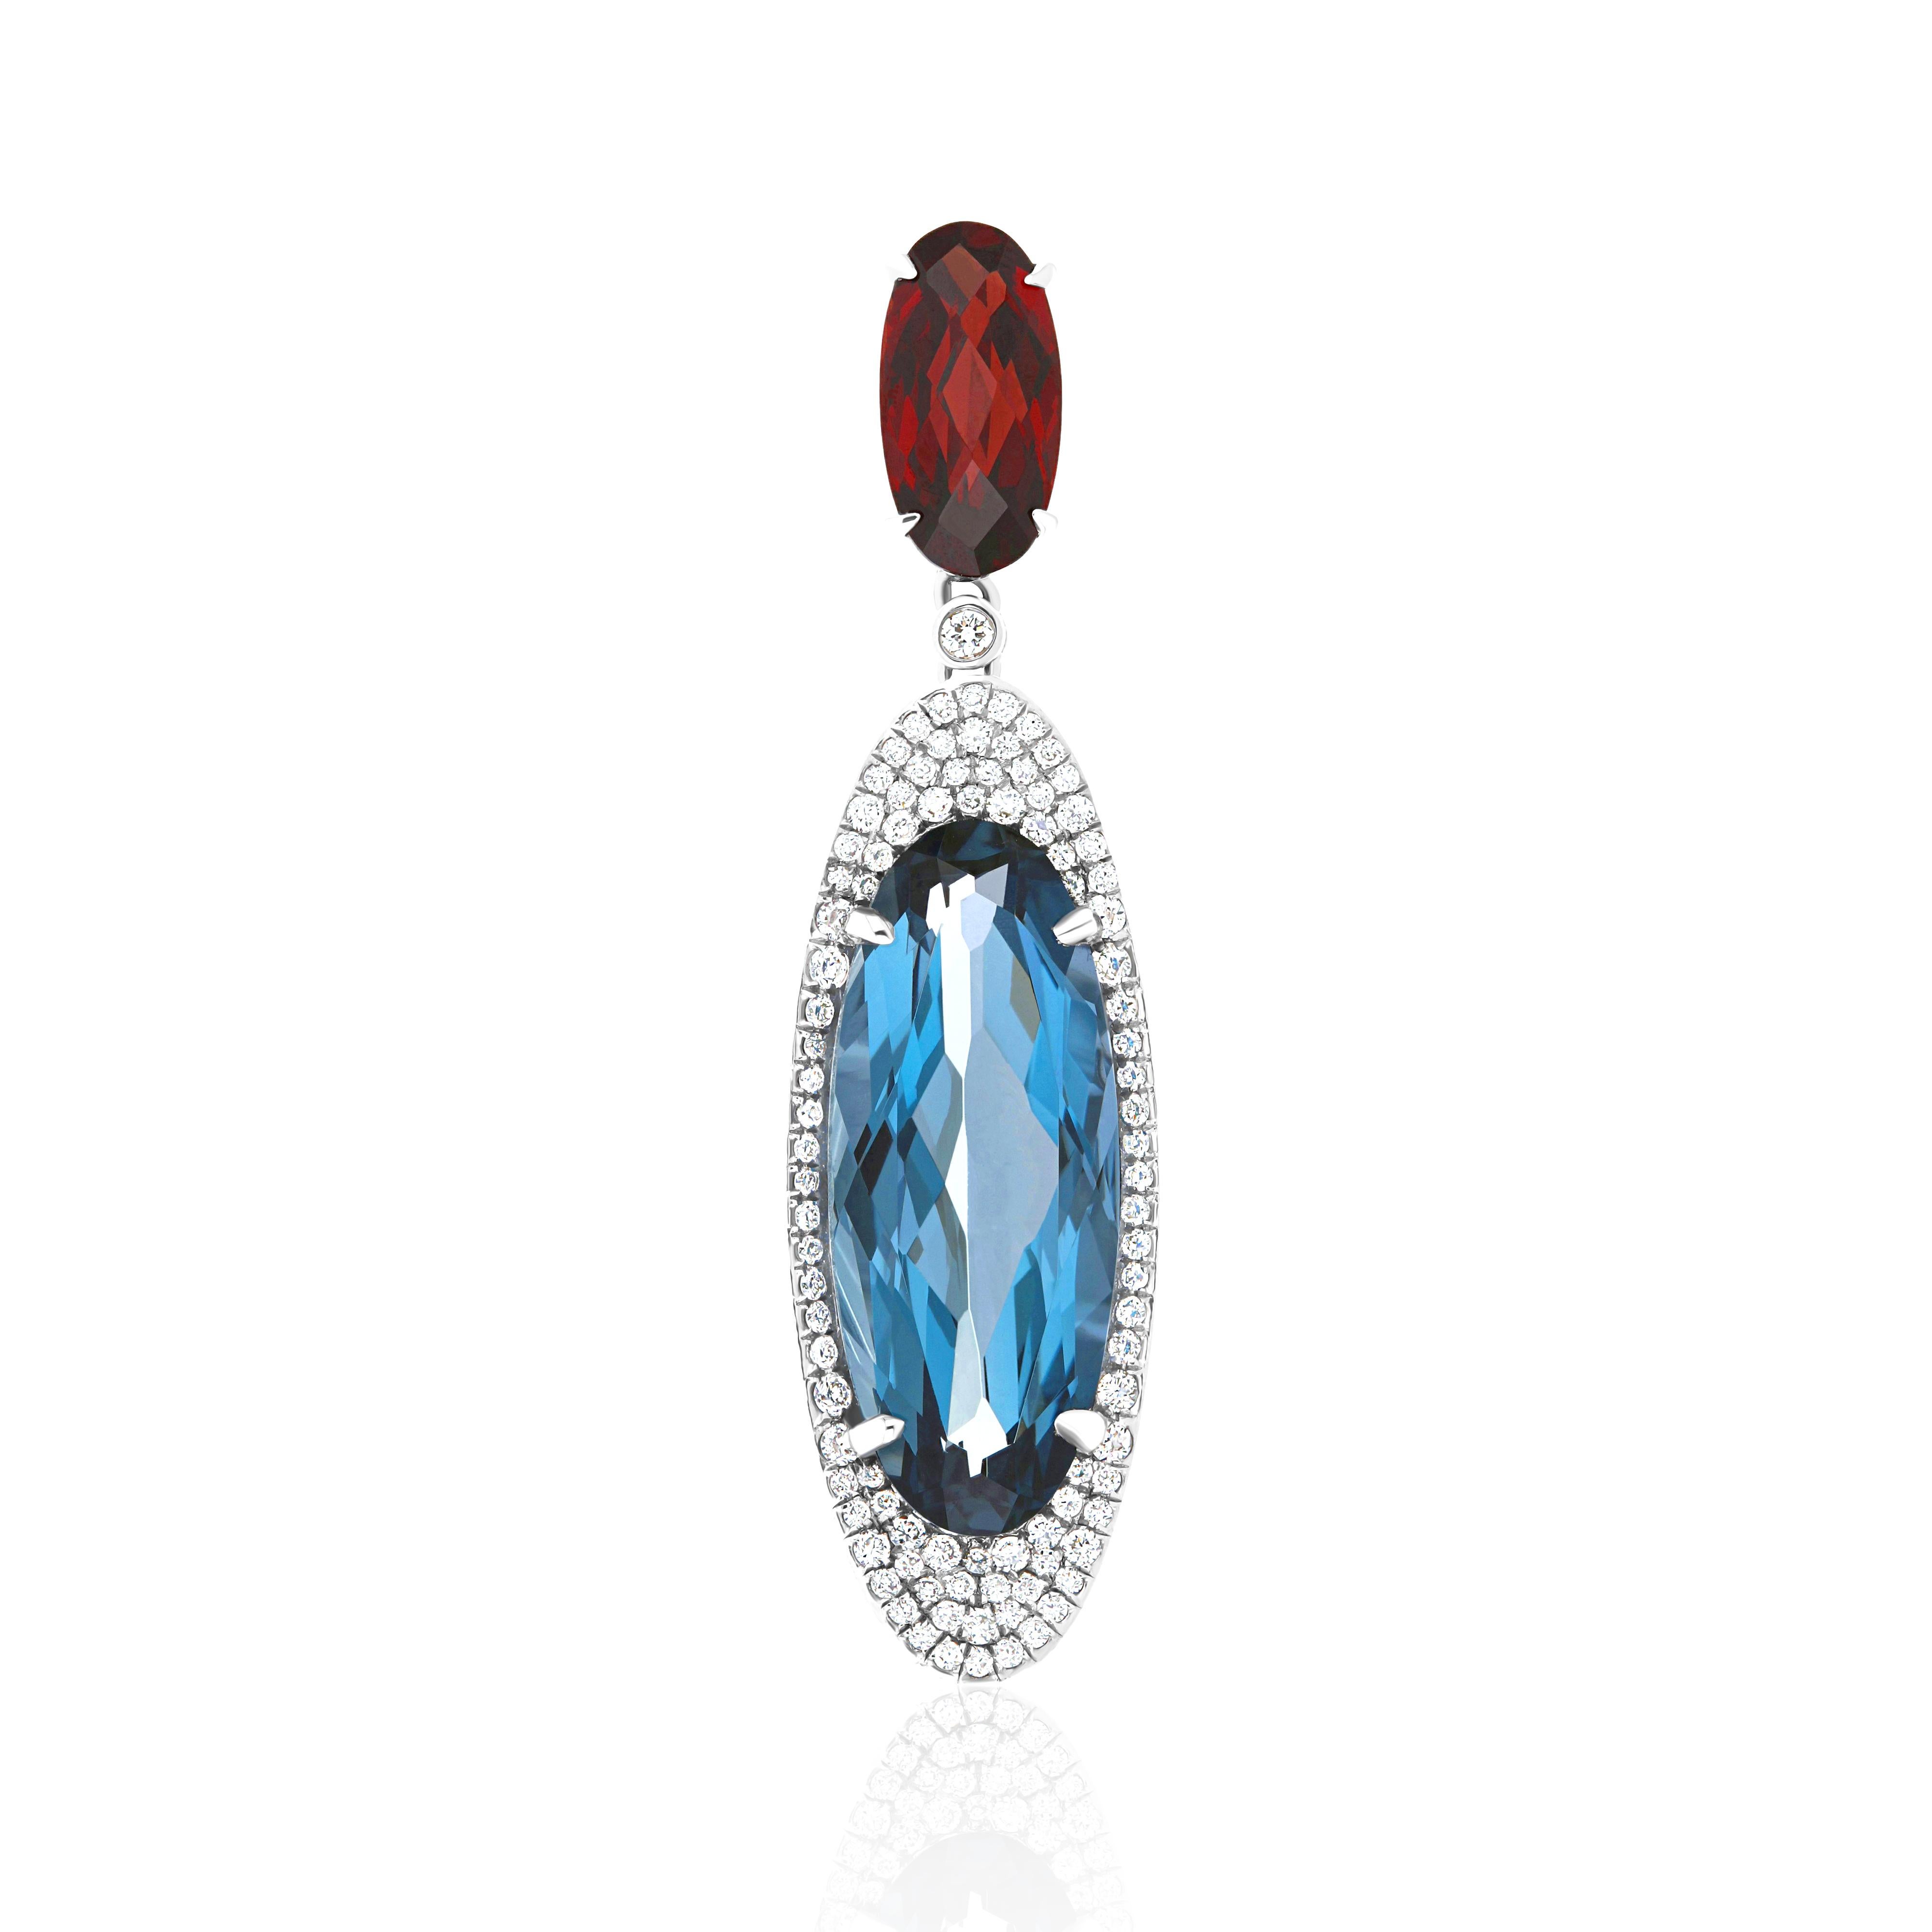 Elegant and exquisitely detailed Cocktail 14 Karat White Gold Pendant, center set with 7.78Cts. (approx.) Fancy Elongated Oval Shape London Blue Topaz,  accented with Fancy Elongated Oval Garnet weighing 1.66 Cts(approx.)  Surrounded with Diamonds,